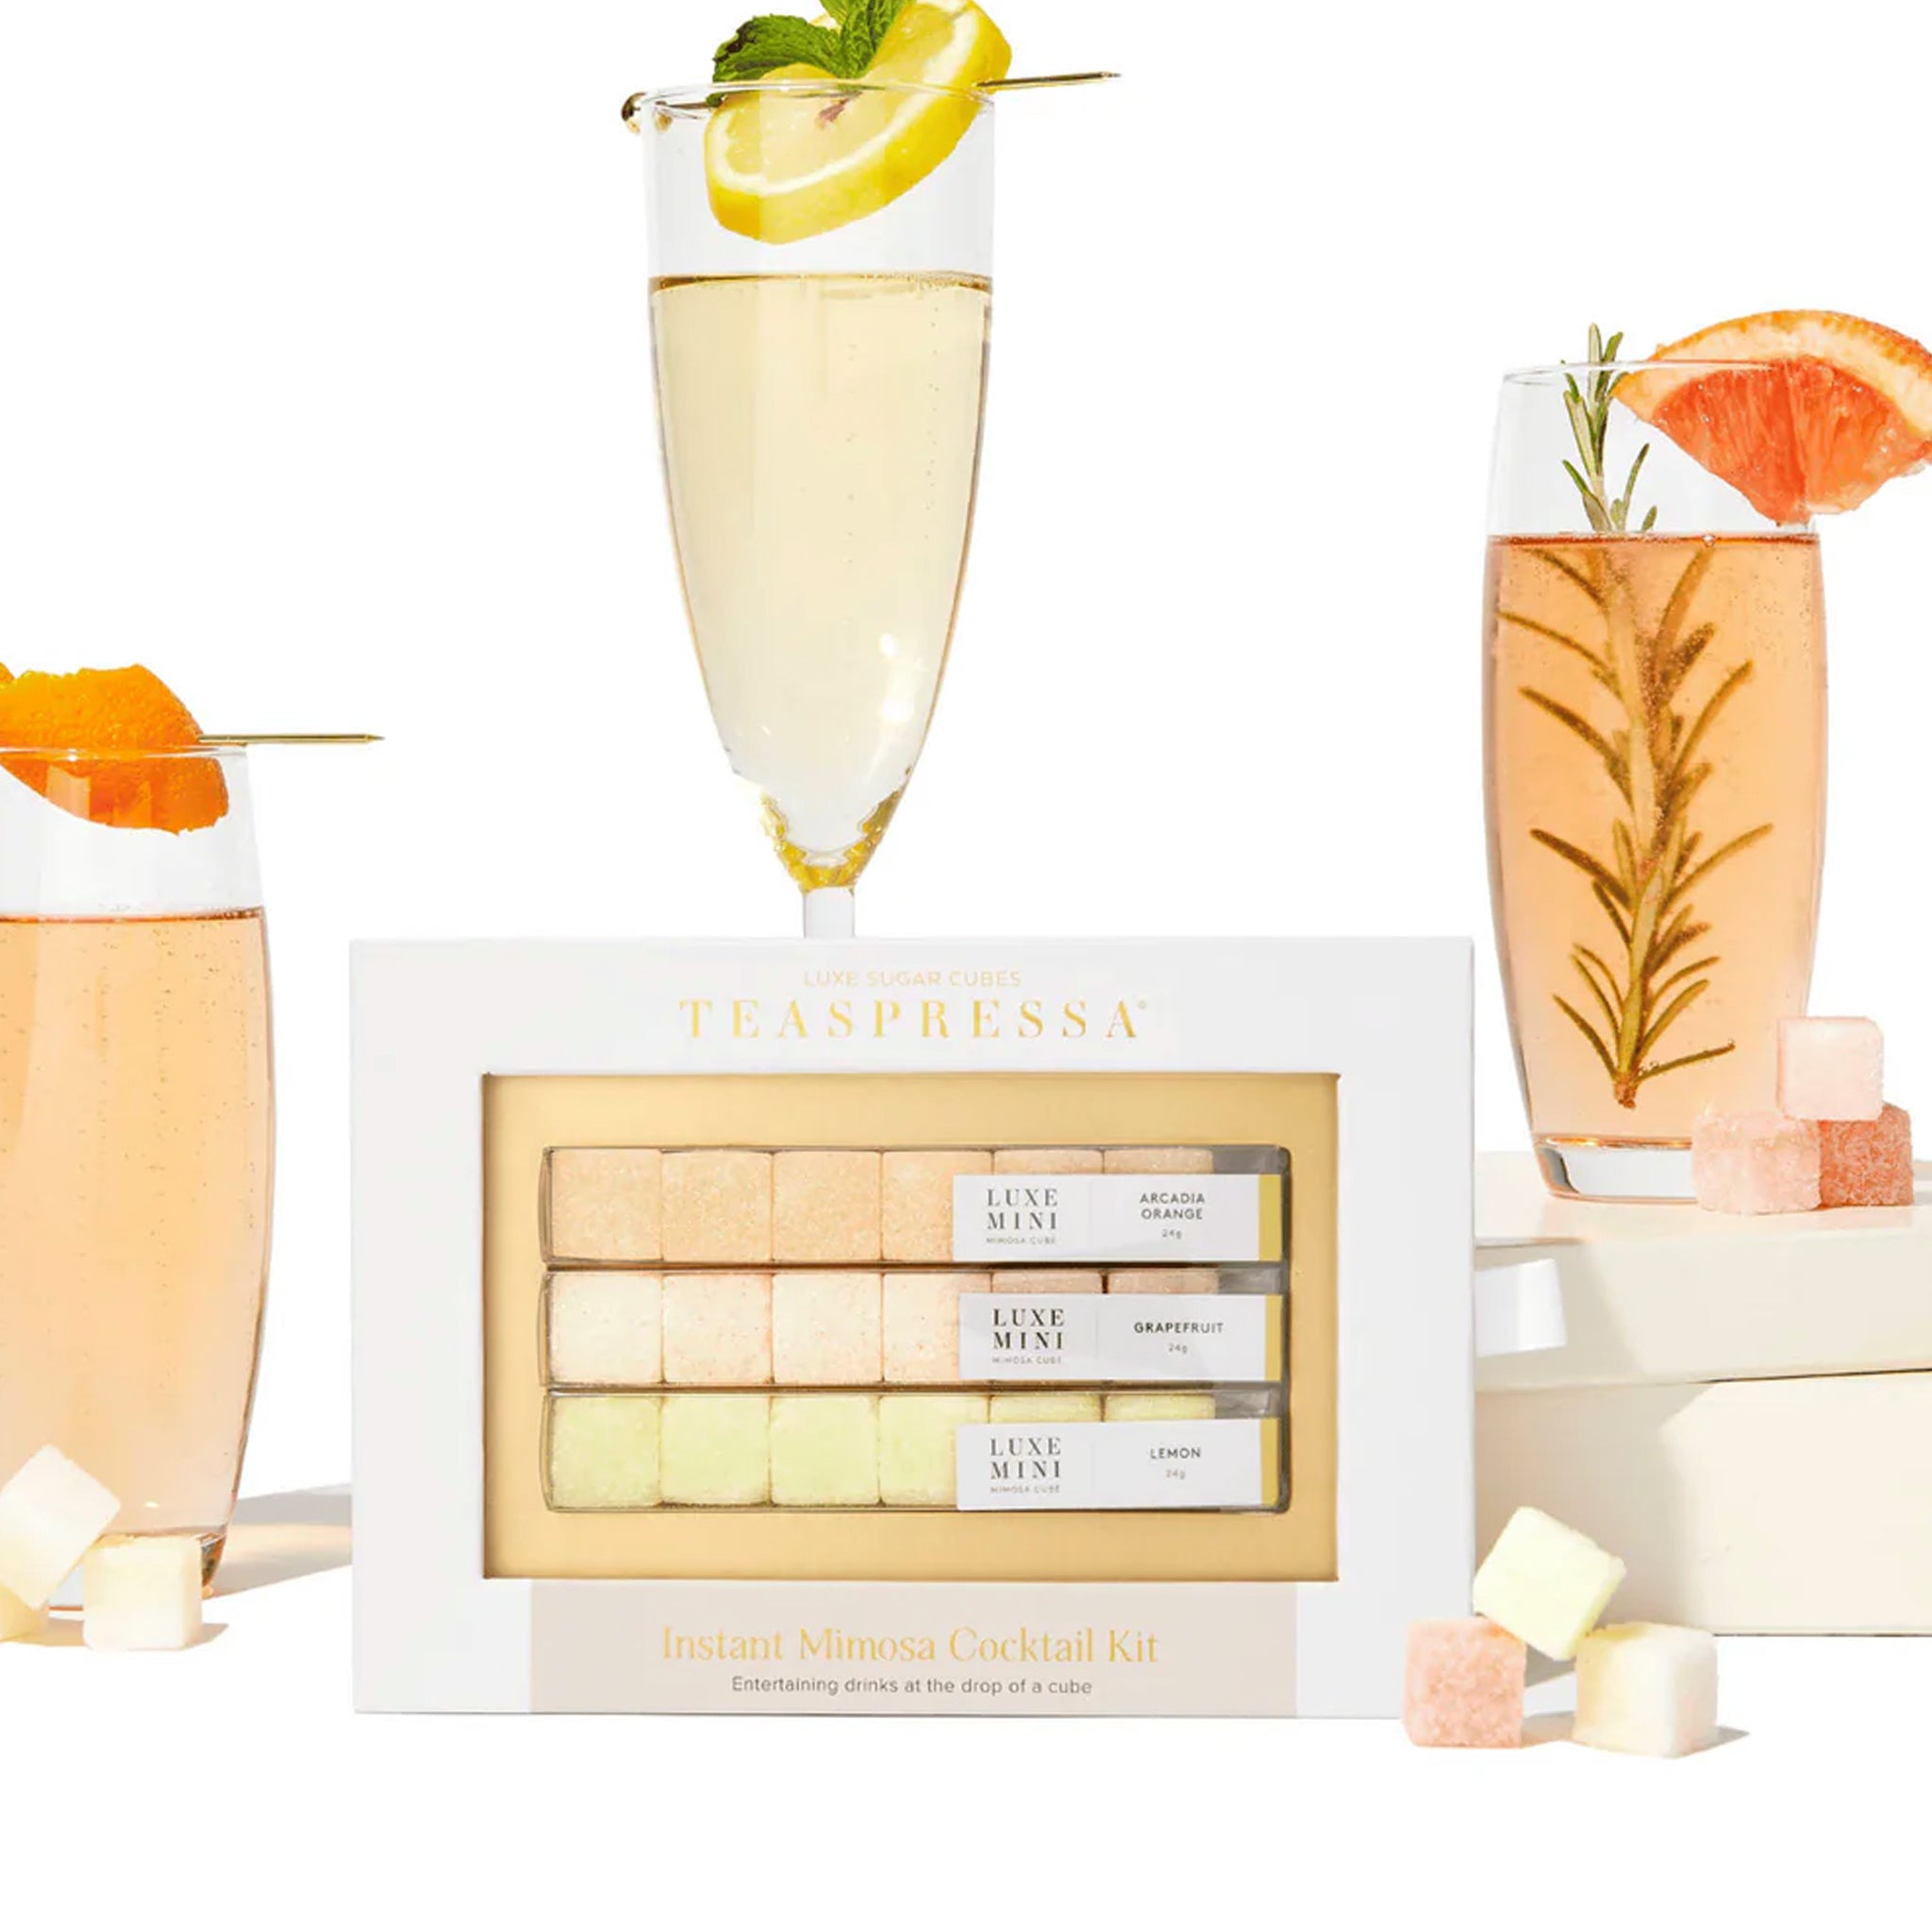 On a cream background is a set of three different flavored sugar cubes made for instant mimosa cocktails. The packaging reads, &quot;Teaspressa Instant Mimosa Cocktail Kit&quot;.